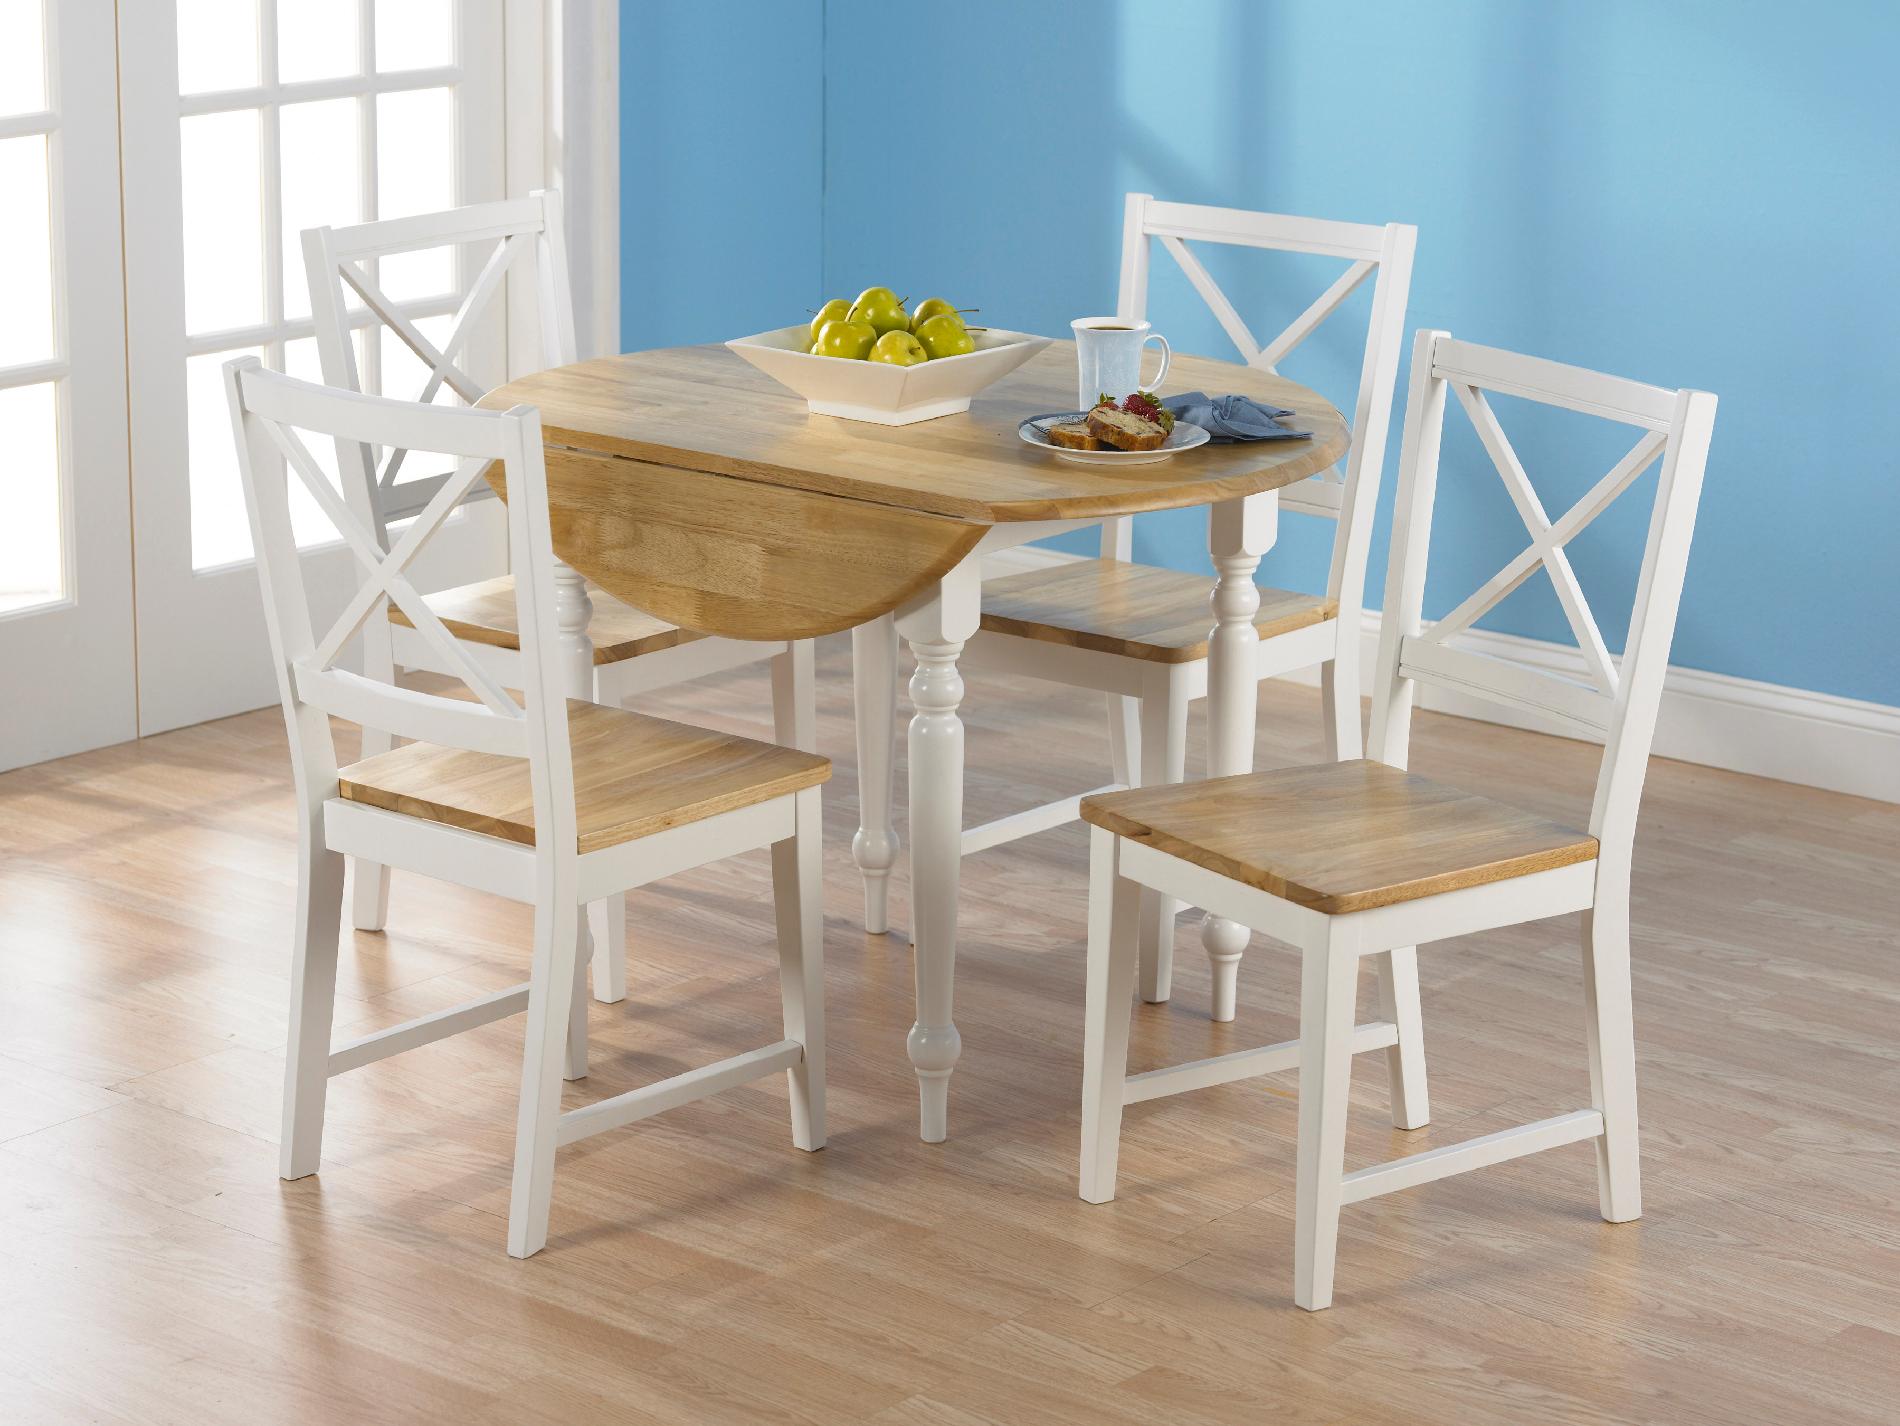 5 pc. Virginia Dining Set in white/natural